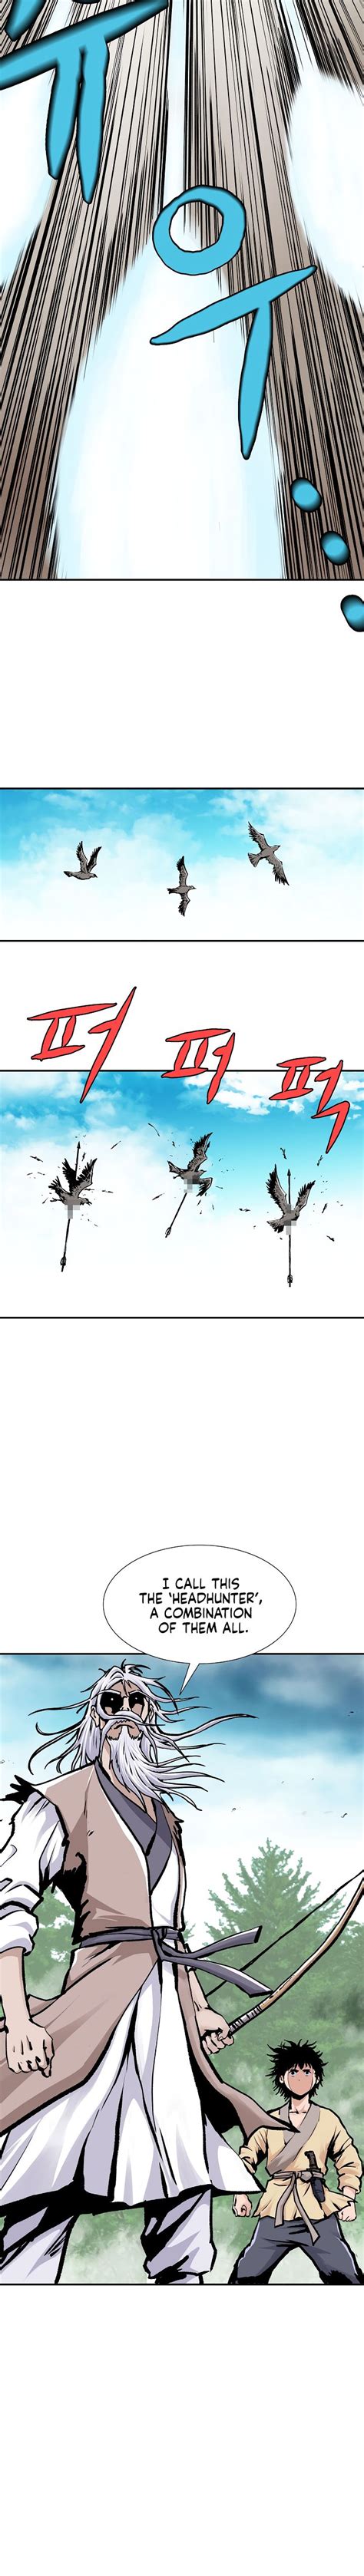 Please bookmark this page and check back later for updates! Manga Bowblade Spirit - Chapter 1 - Isekaiscan Manga - Isekaiscan Manga - Read Manga Online For Free